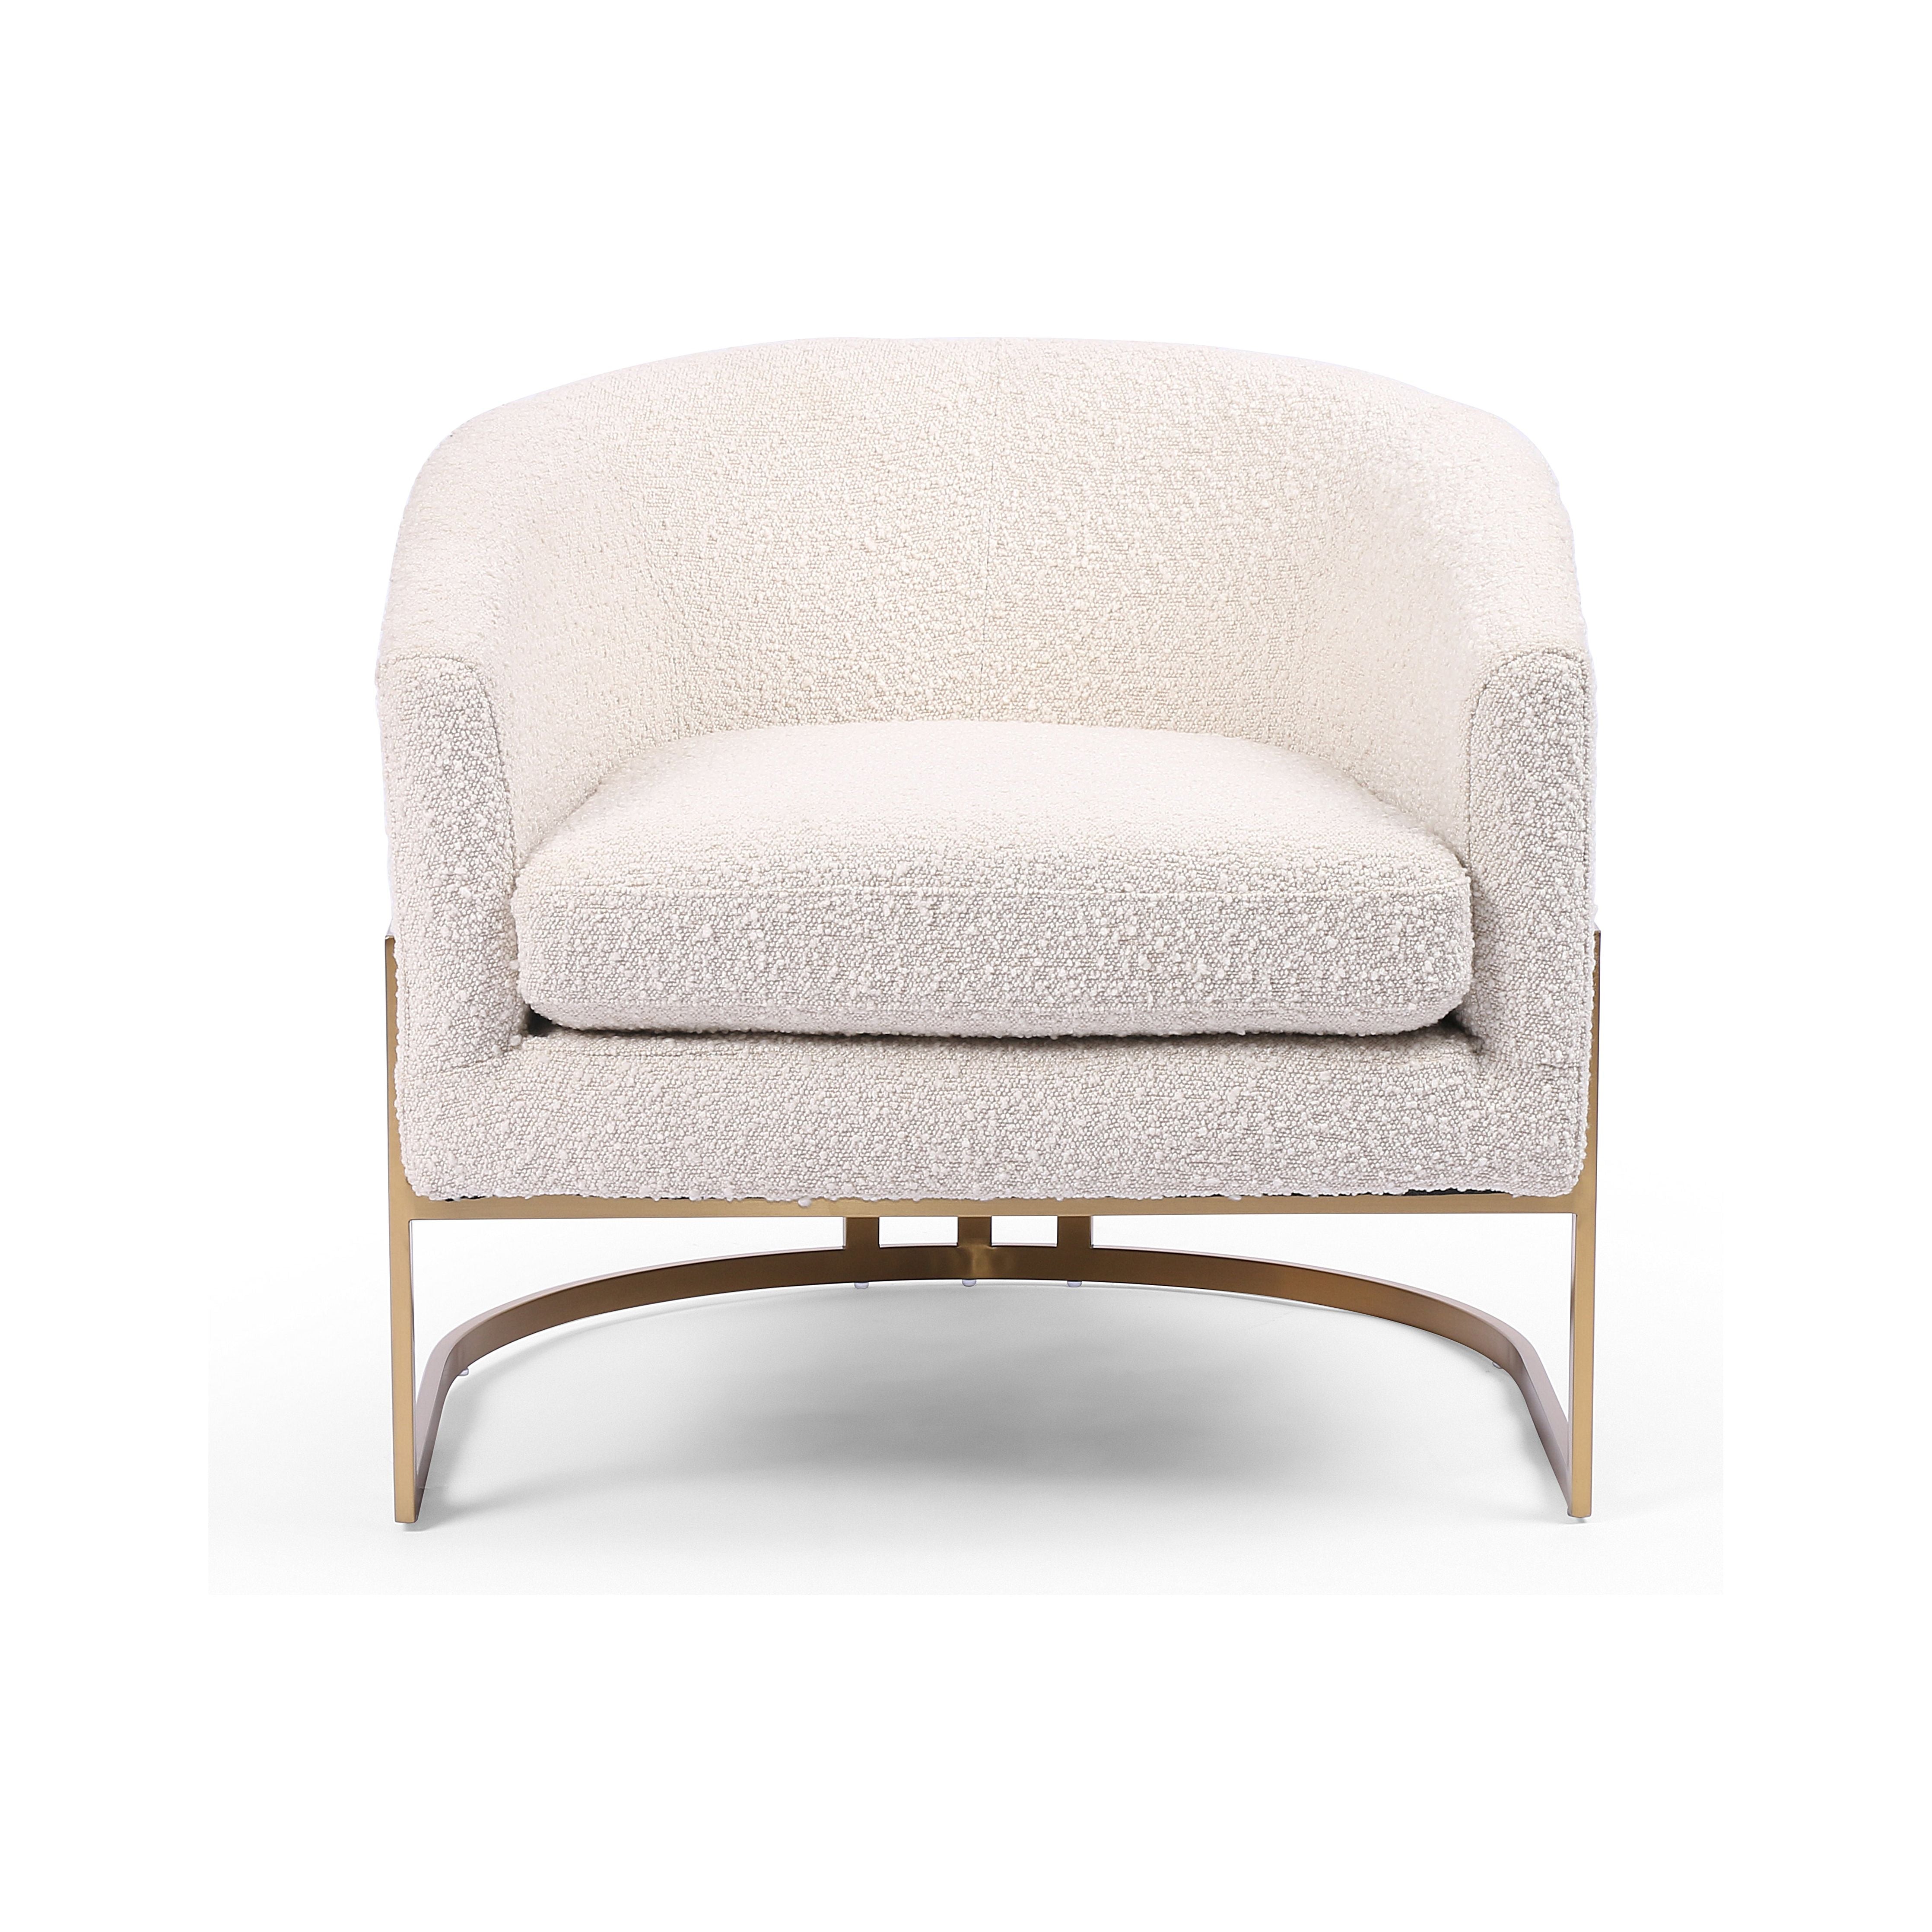 We love the luxe, mid-century-modern seating found in this Corbin Knoll Natural Chair, with a subtle swank and a focus on details. The satin brass-brushed metal framing matched with the natural curving of the chairs makes it a unique piece for your living room, bedroom, or office.   Overall Dimensions: 28"w x 29.25"d x 26"h Materials: Stainless Steel, 54%Poly/45%Acrylic